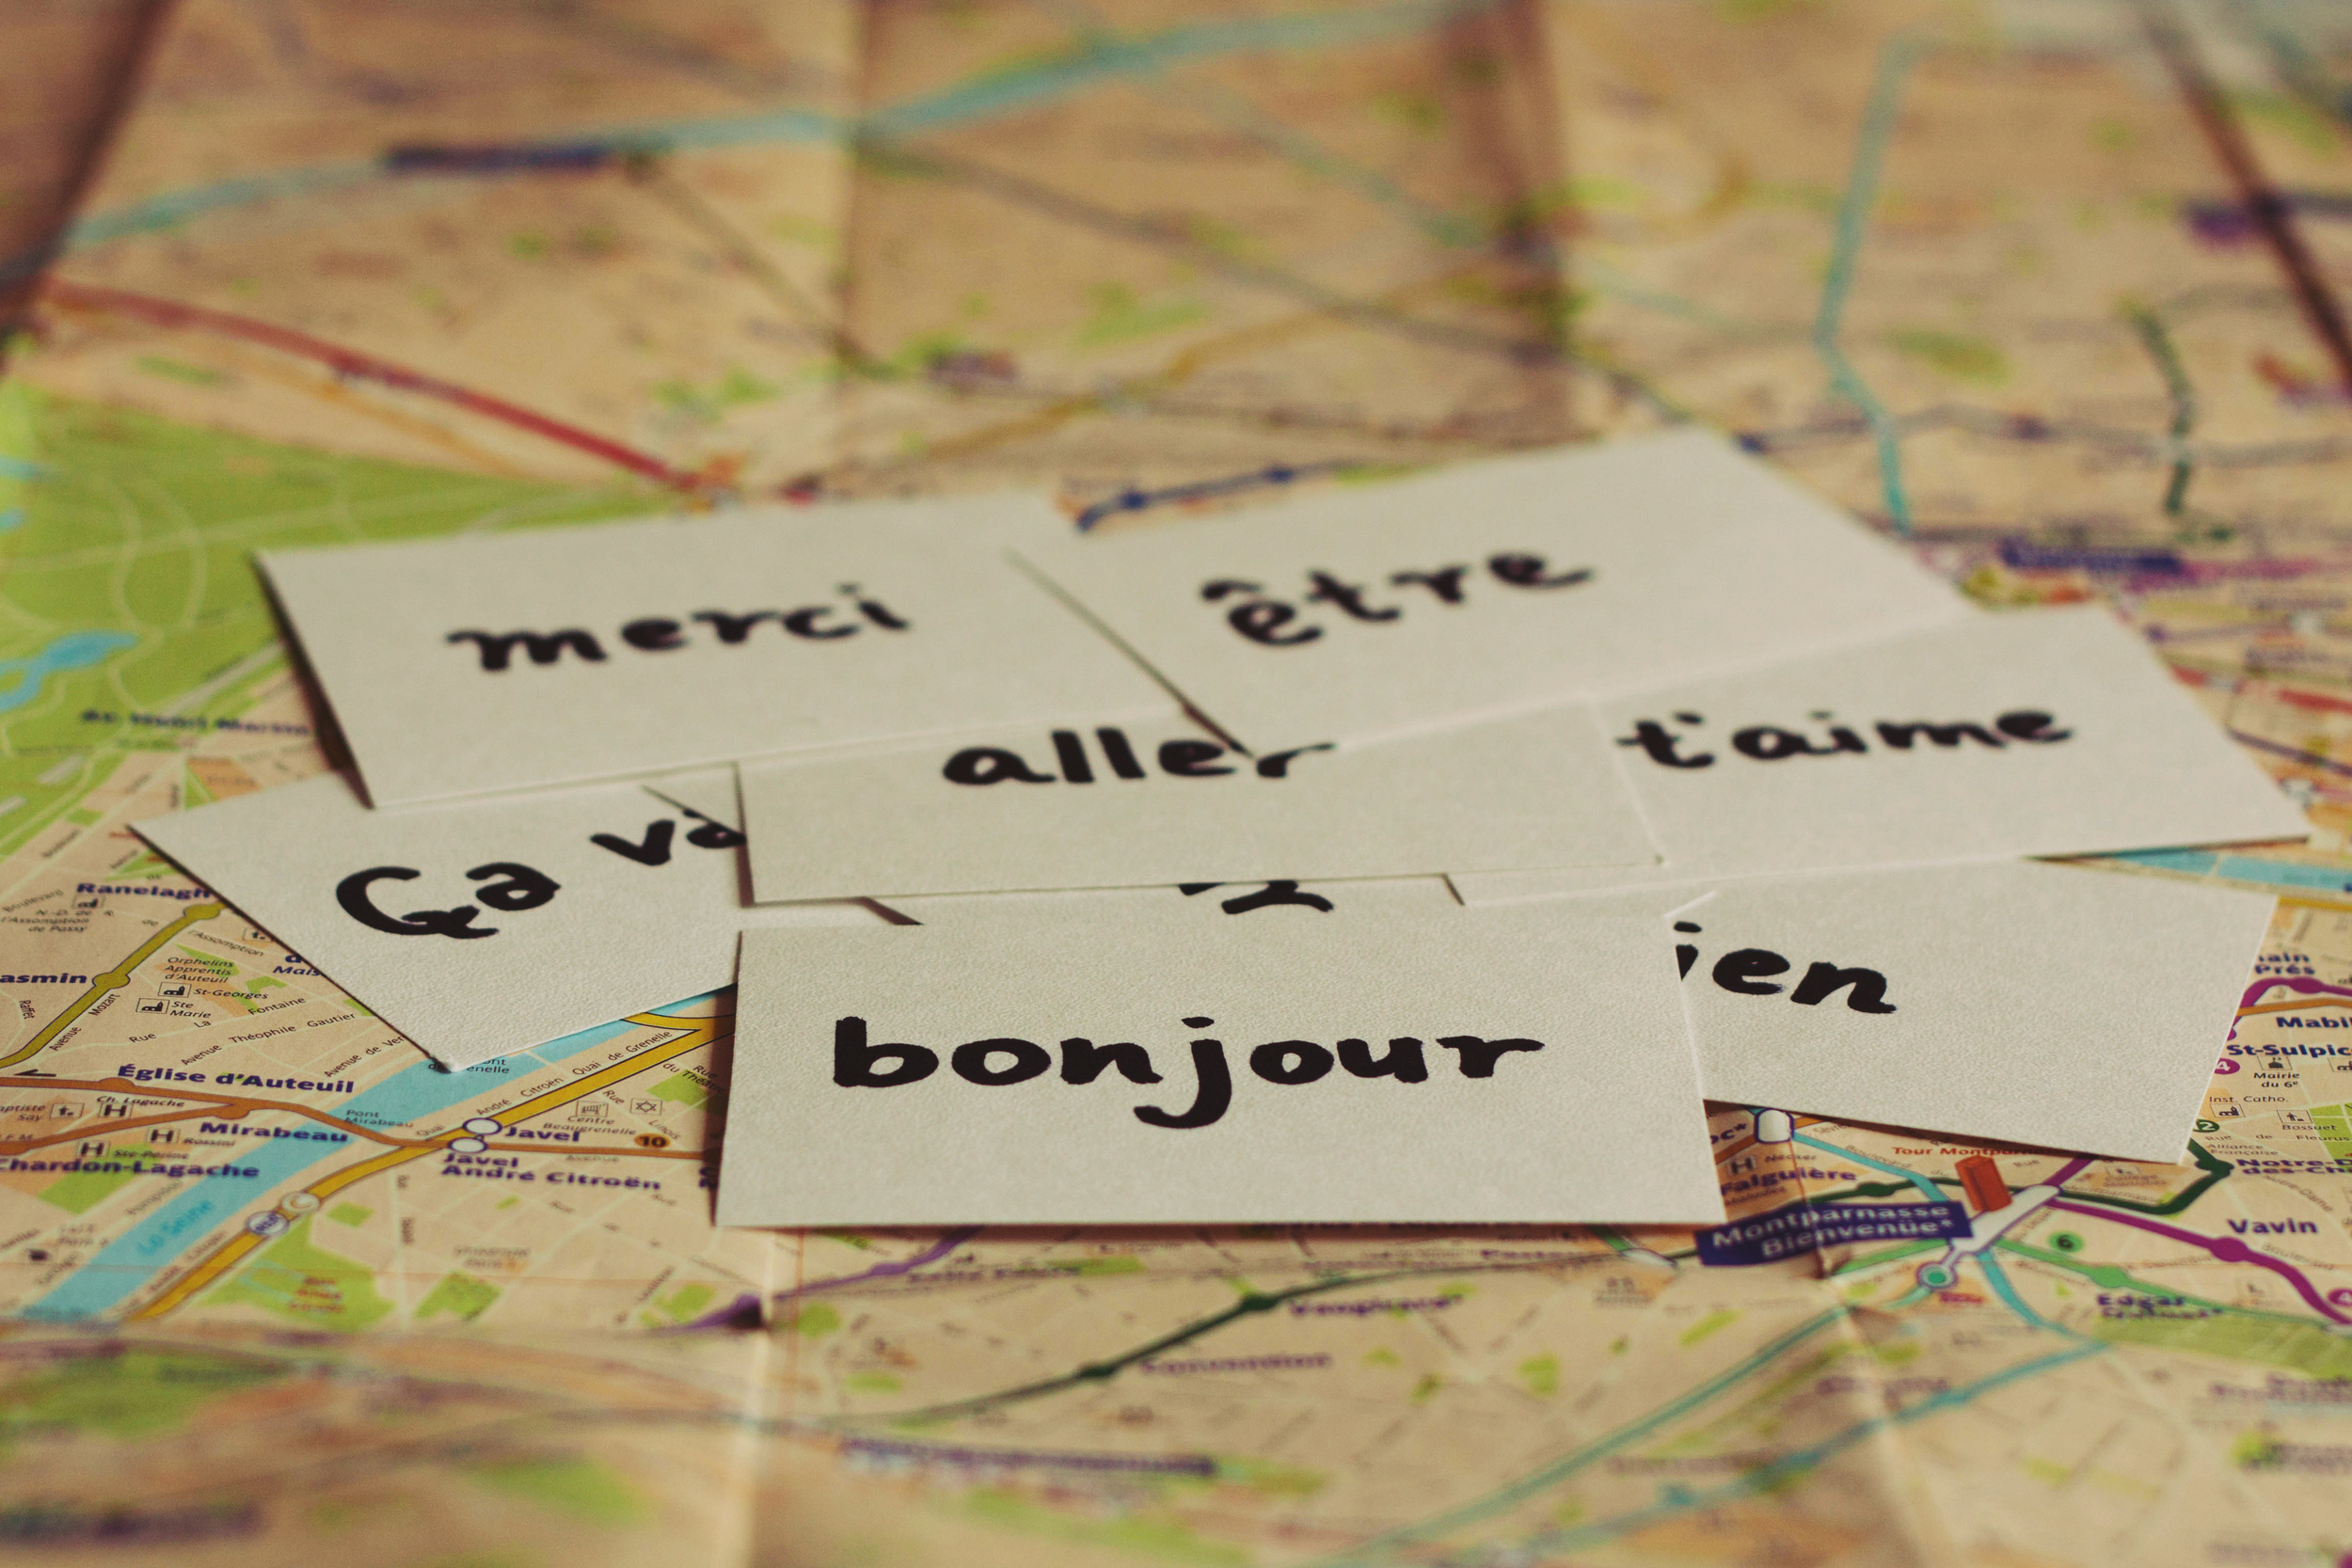 <p>French is a little bit tougher than Spanish and Italian for English speakers to pick up on because of the differences in pronunciation, but the languages share several words. Though it’s not the easiest Romance language to learn, it’s still not difficult. </p><p>You may also like: <a href='https://www.yardbarker.com/lifestyle/articles/20_essential_tips_for_a_successful_road_trip/s1__37554986'>20 essential tips for a successful road trip</a></p>